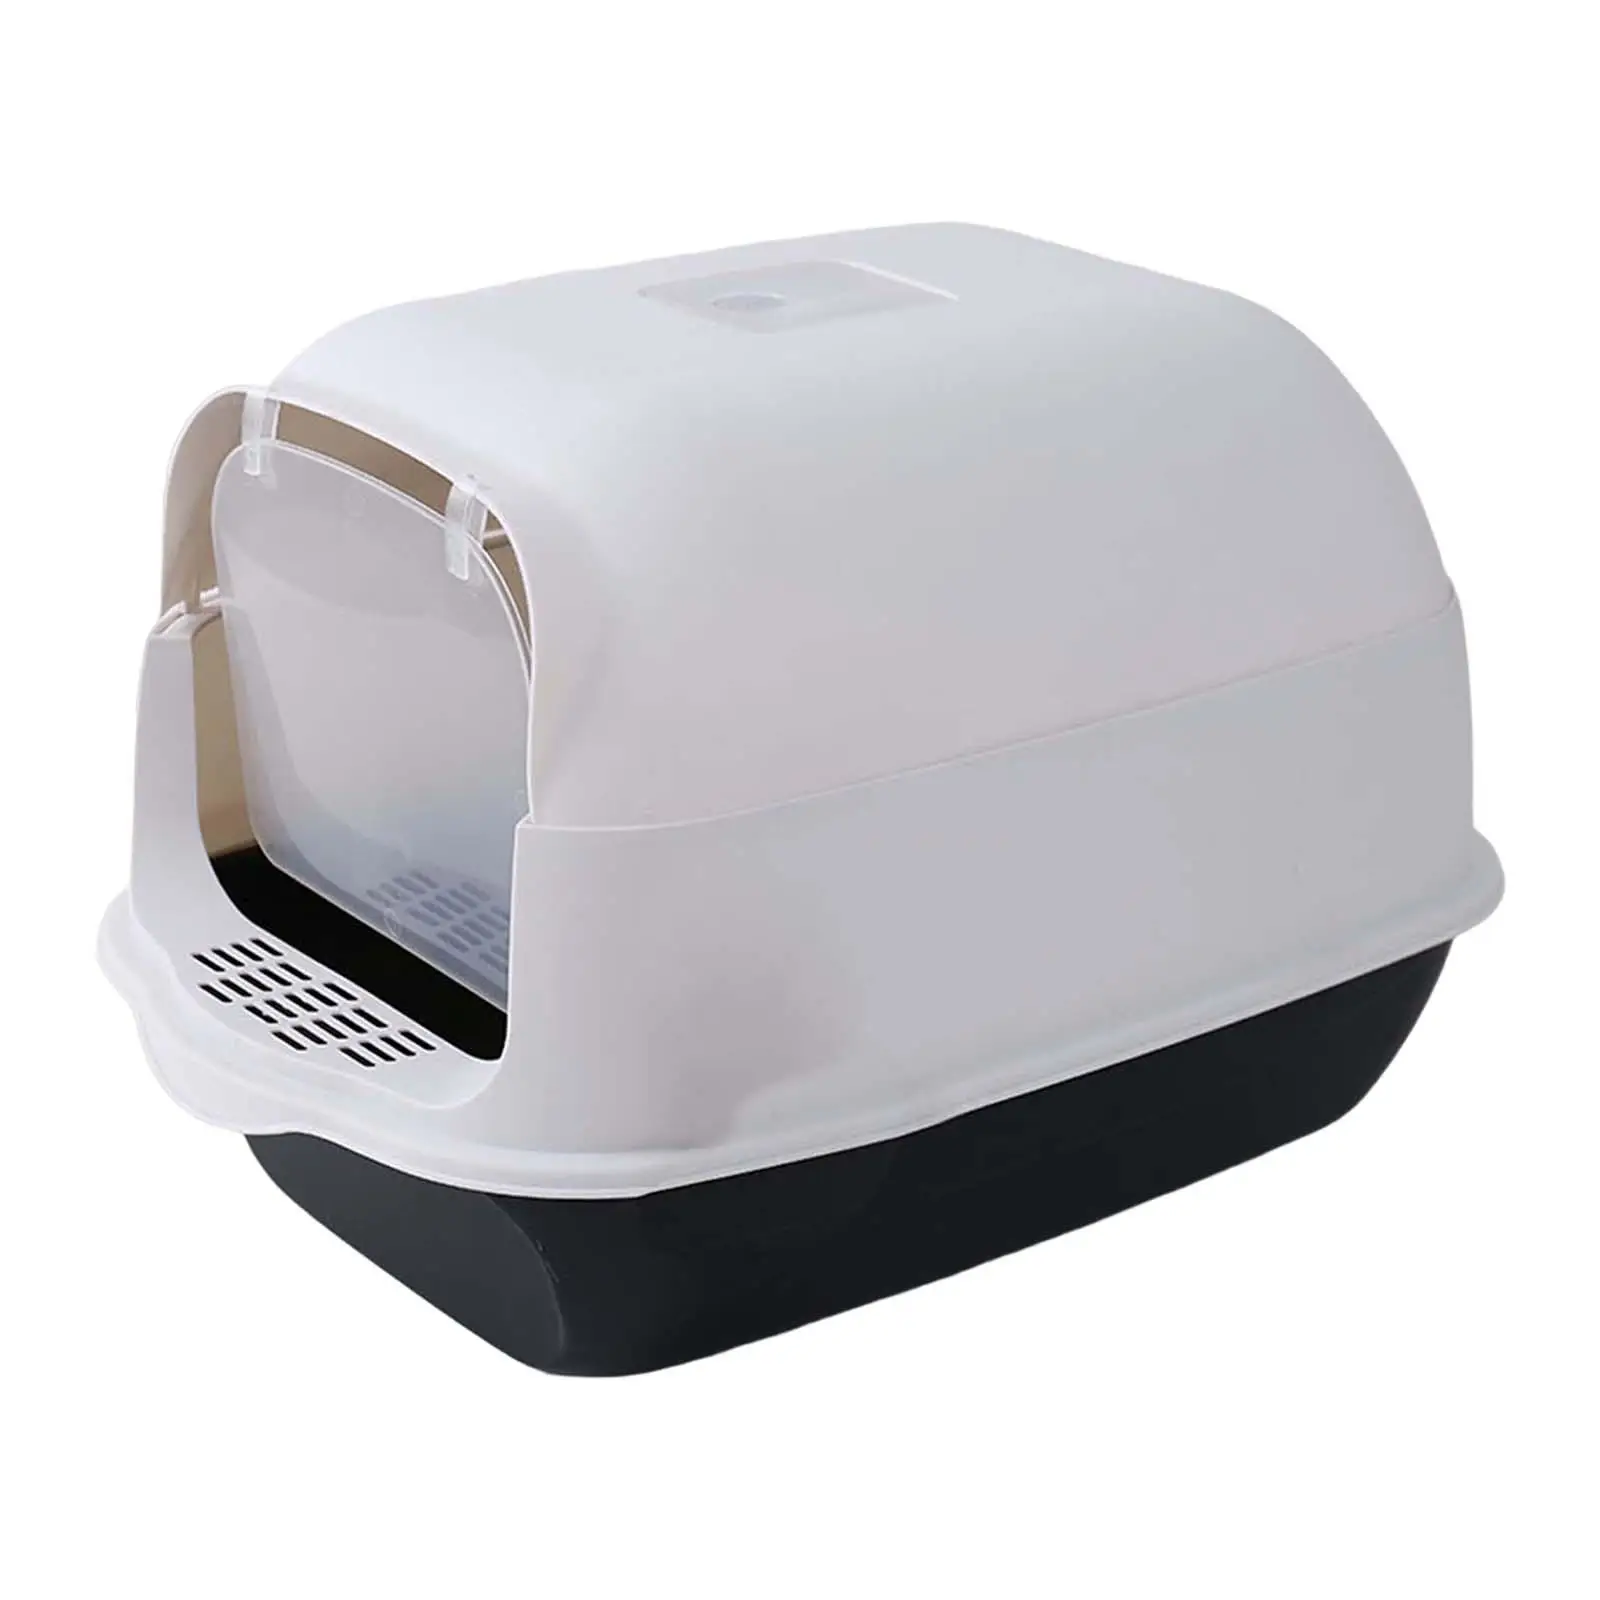 Large Cat Litter Box Easy Tidy with Training Waterproof Supplies Tray Reusable Toilet for Rabbit Kitten Outdoor Travel